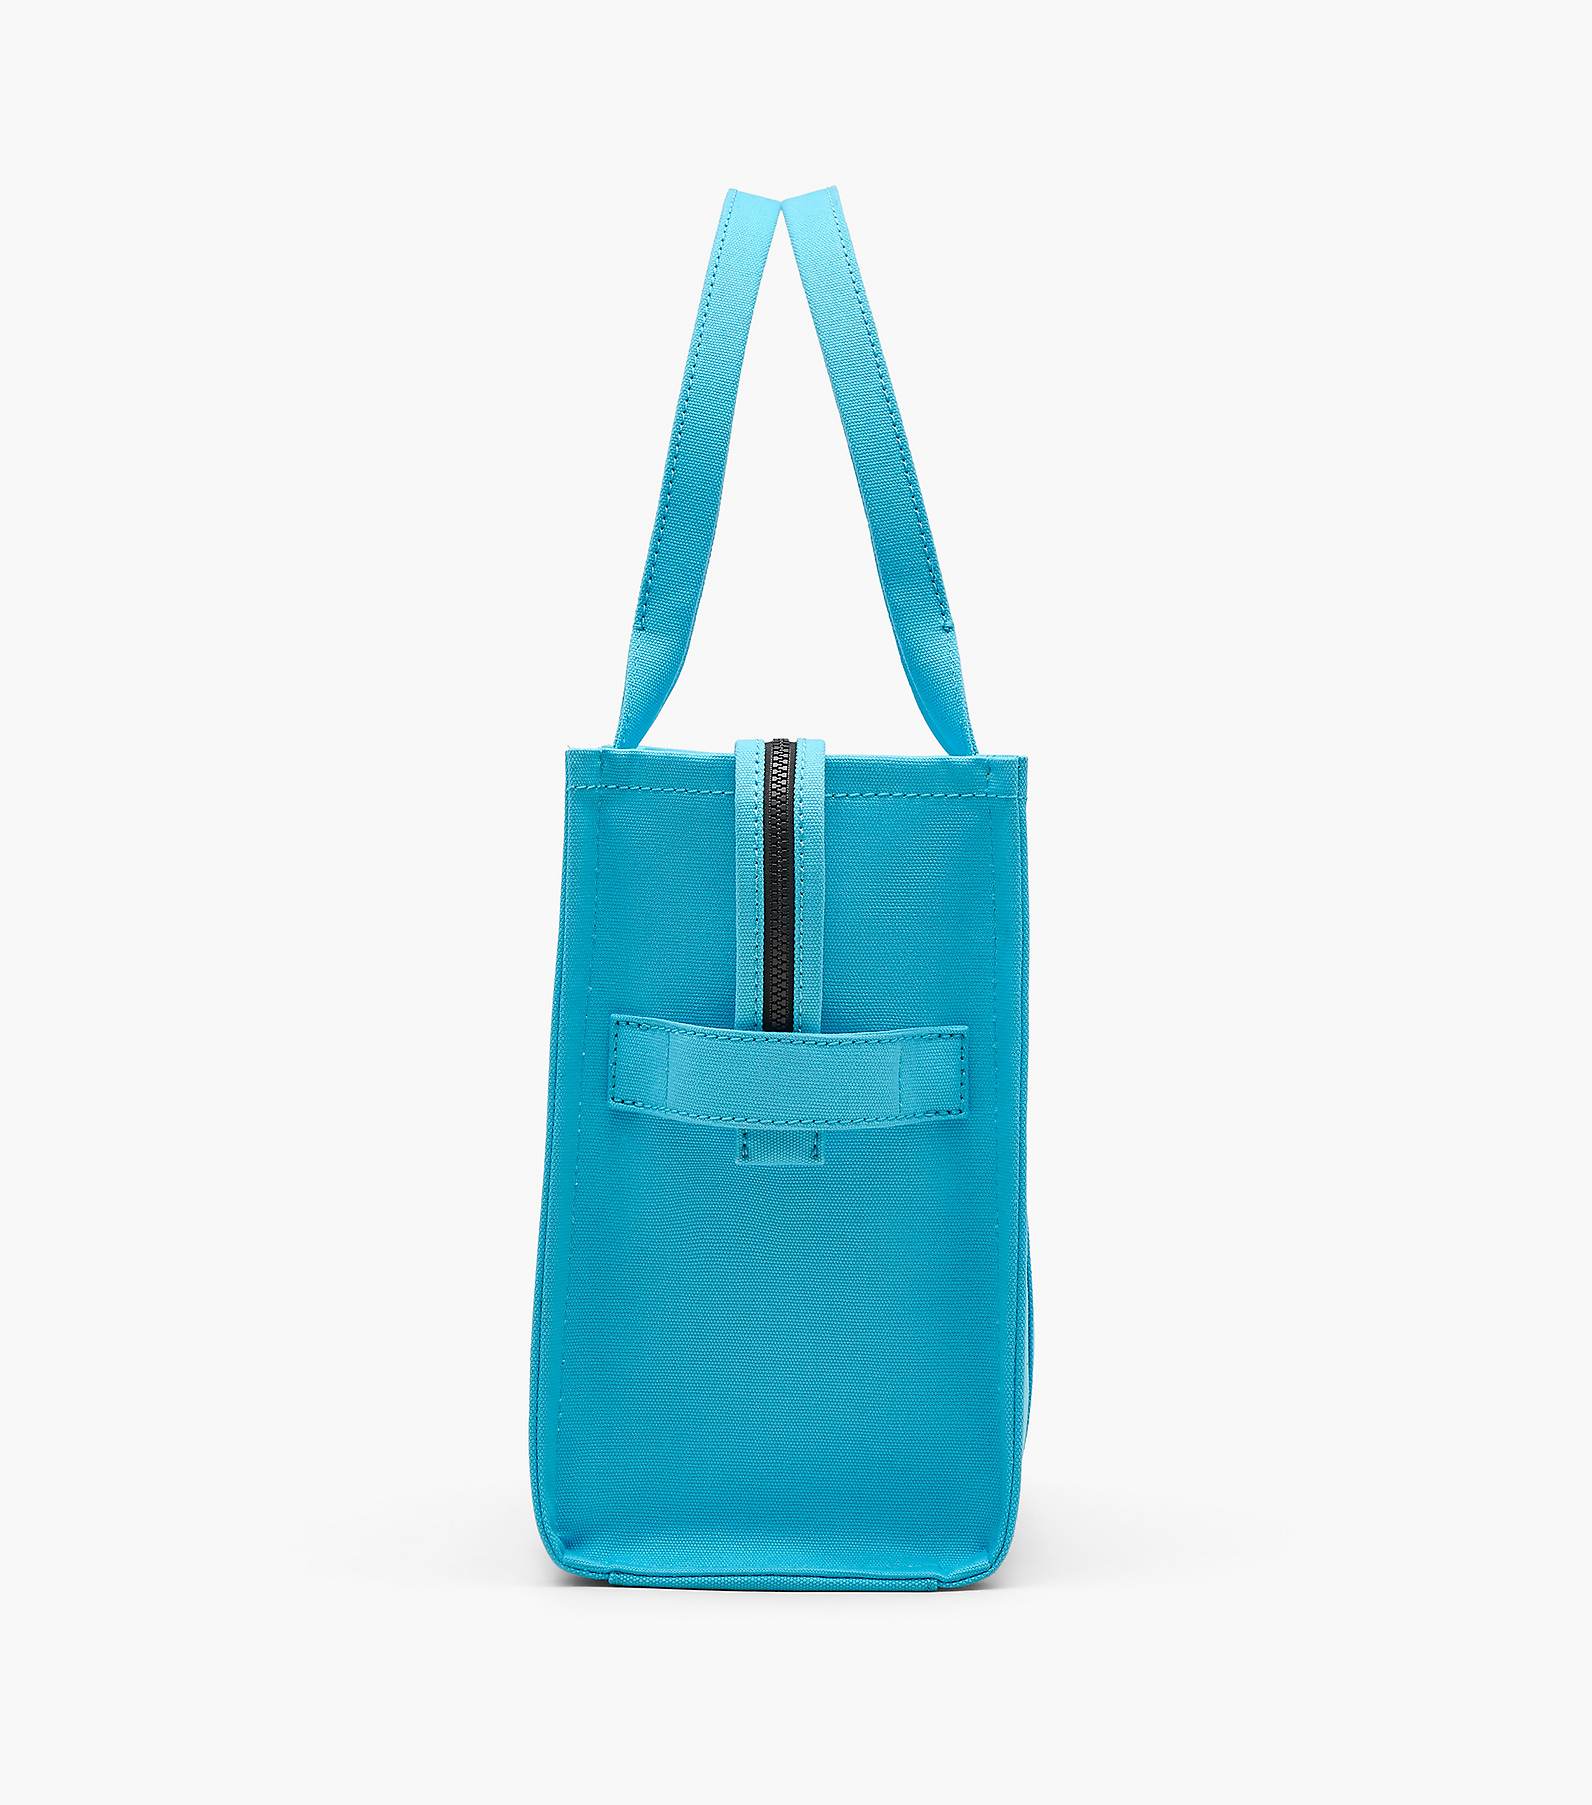 The Canvas Large Tote Bag, Marc Jacobs